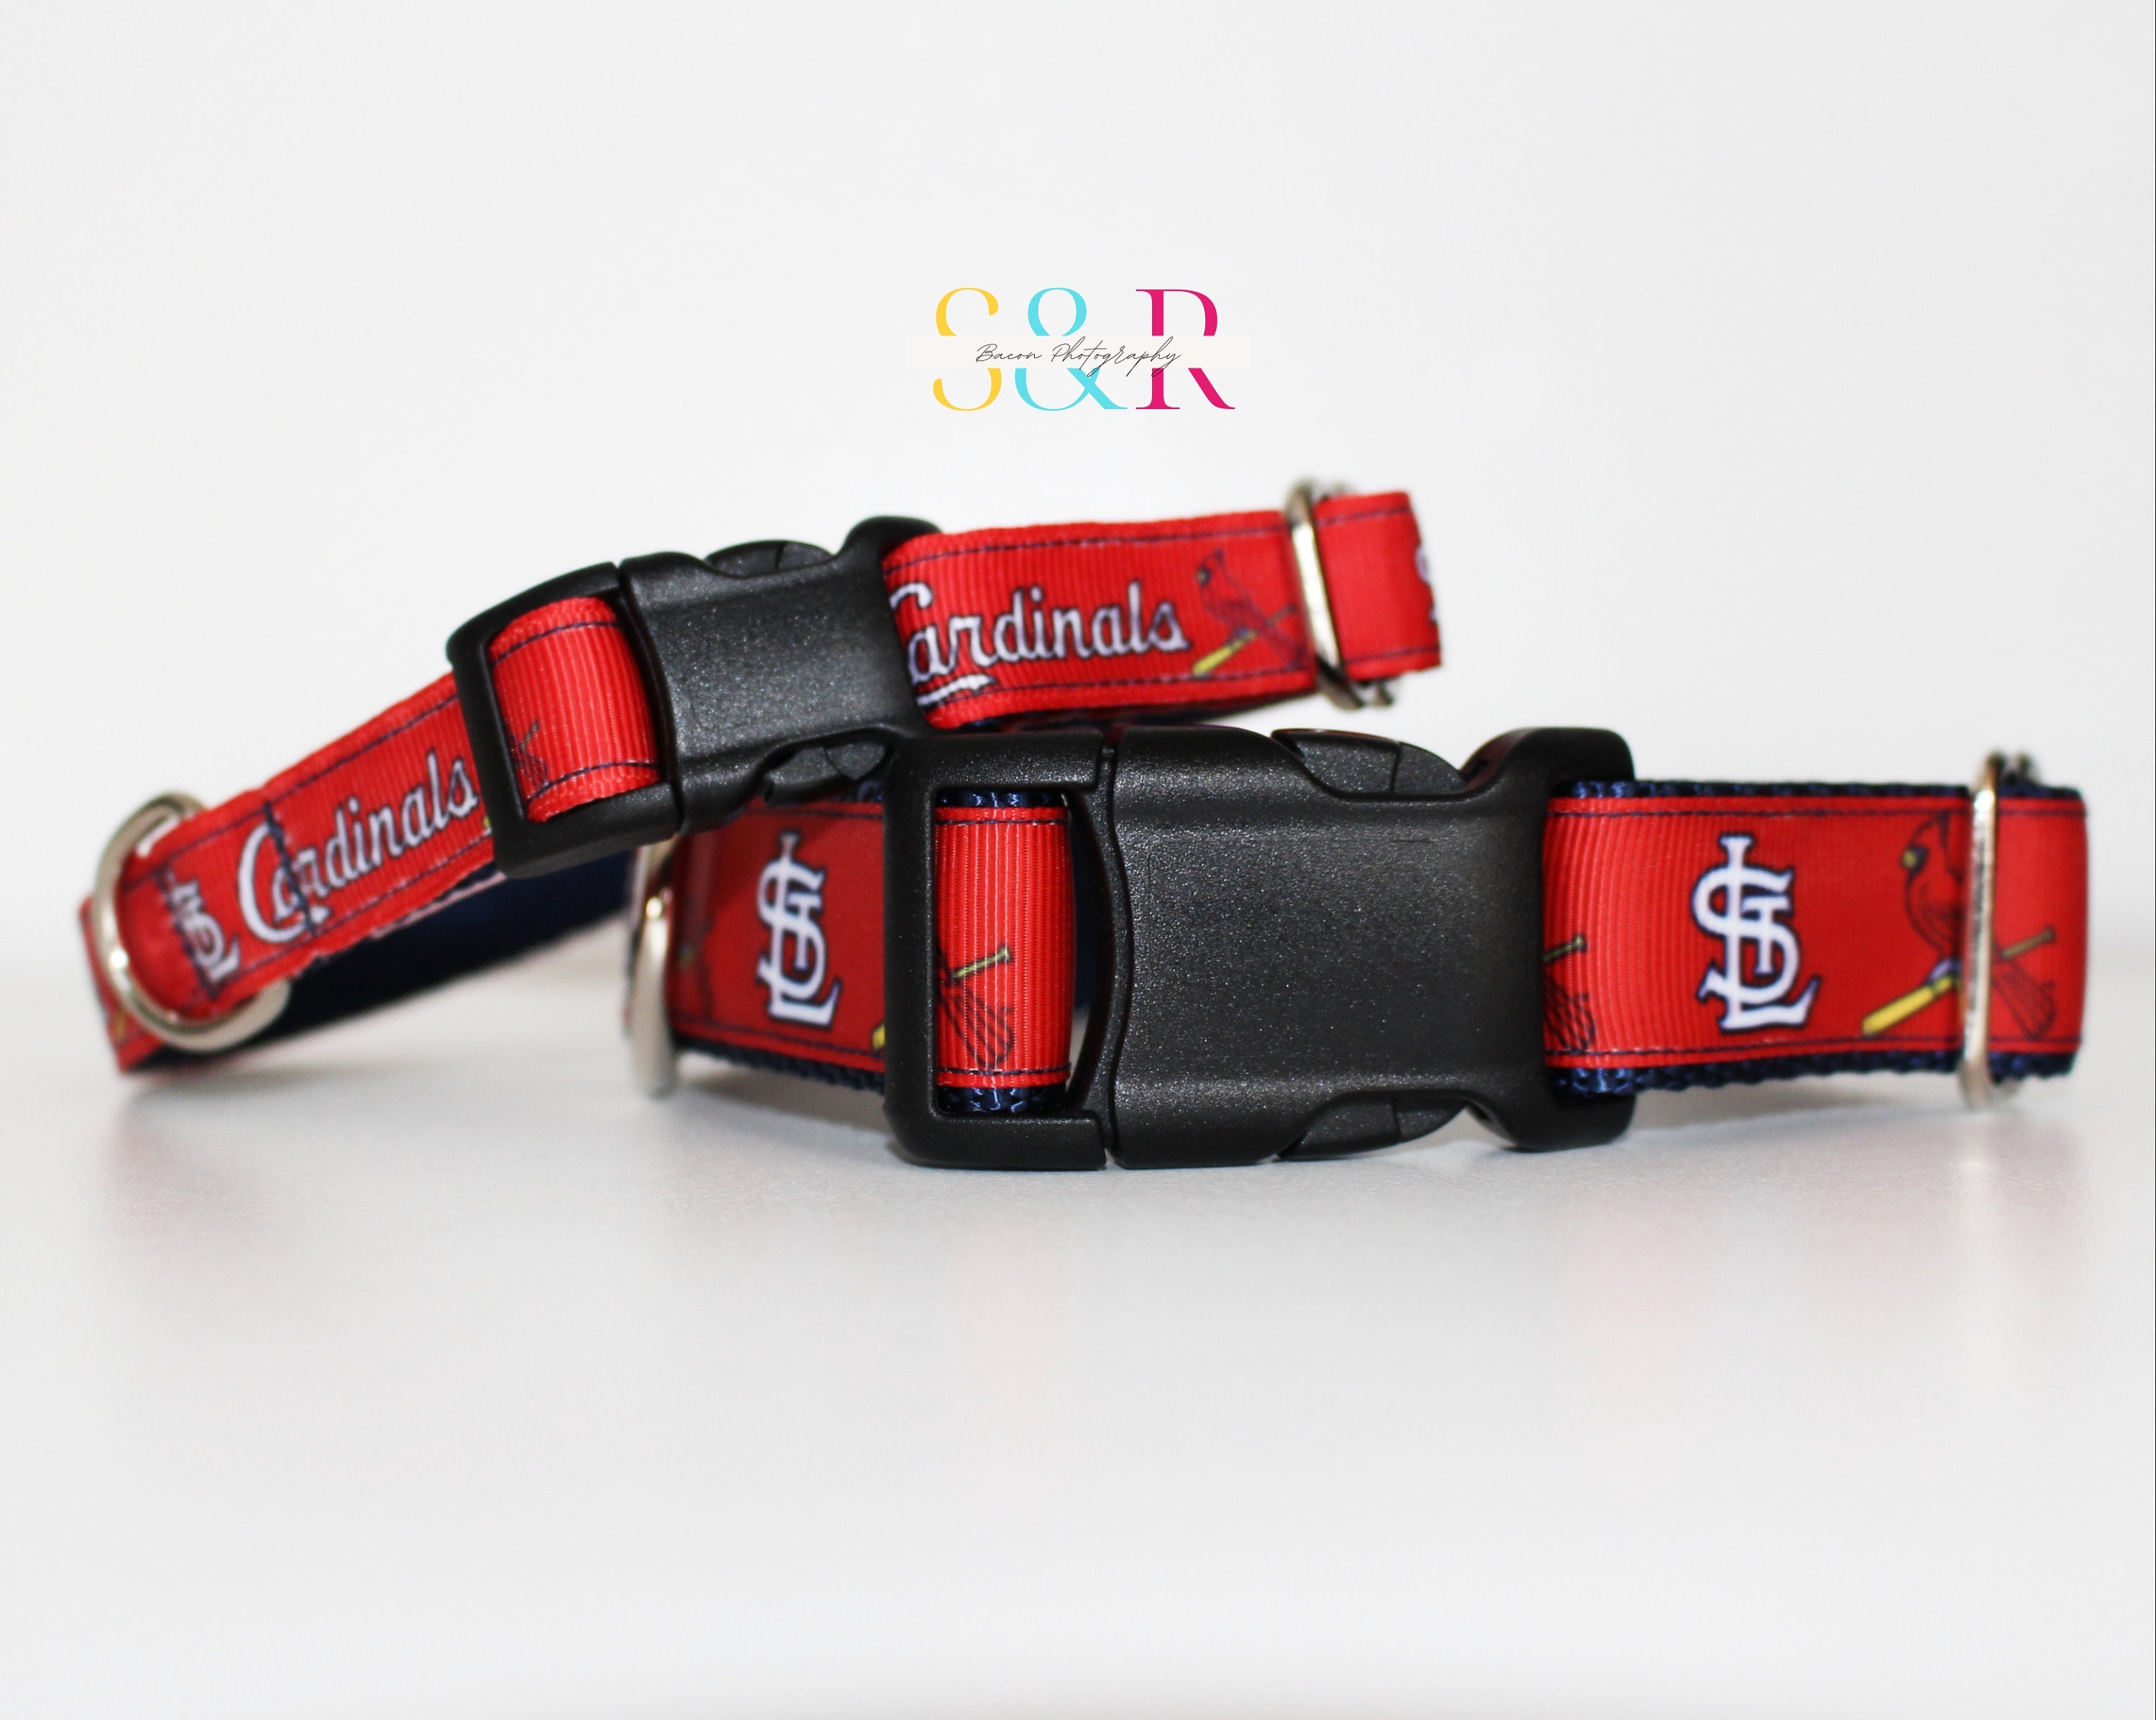 Quick-Tag St. Louis Cardinals MLB Personalized Engraved Pet ID Tag